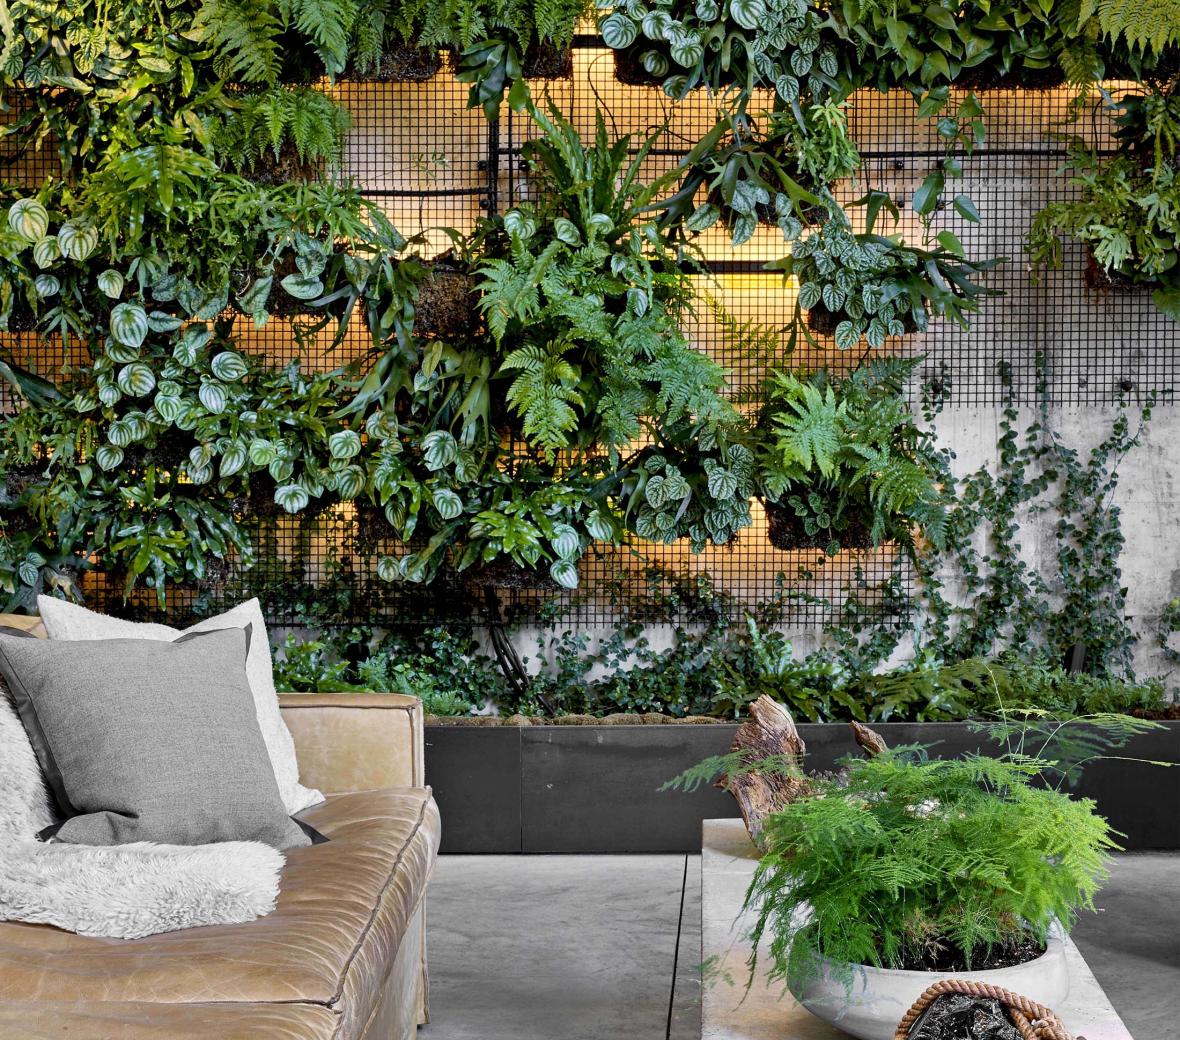 A lounge area with a wall decorated with greenery